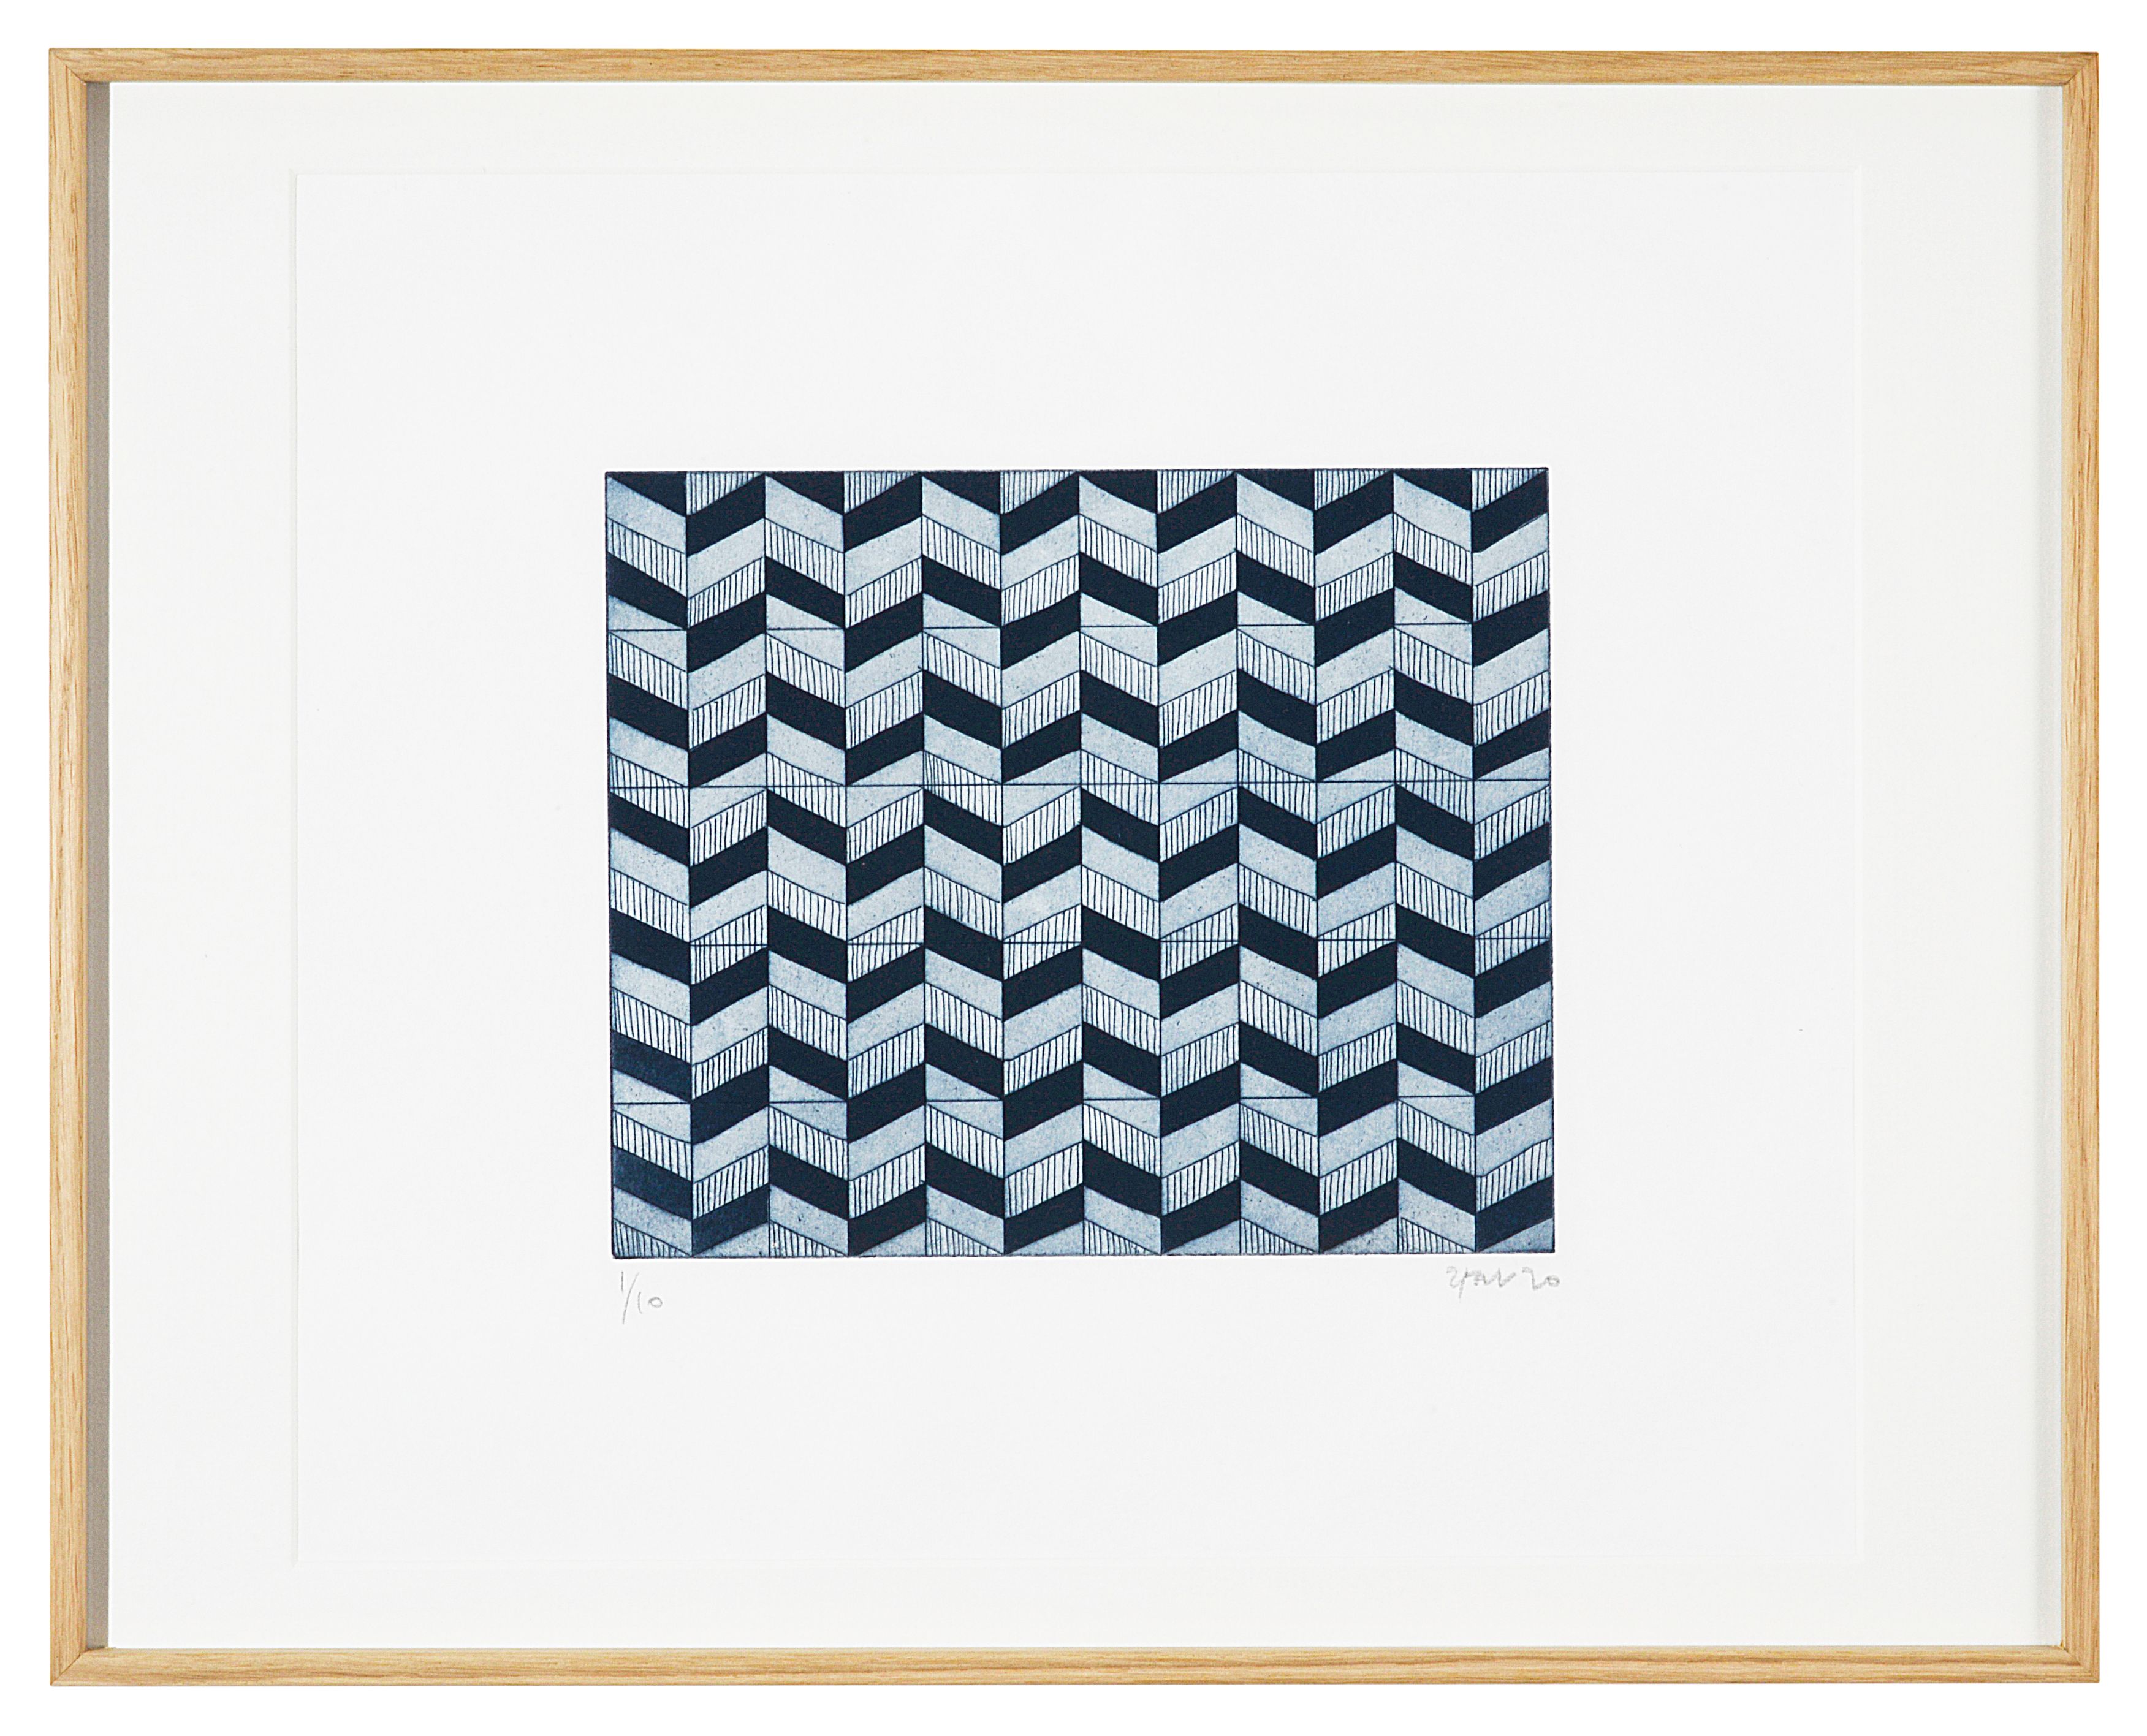 Yoonjung Shim, Herringbone Giant, The Auction Collective